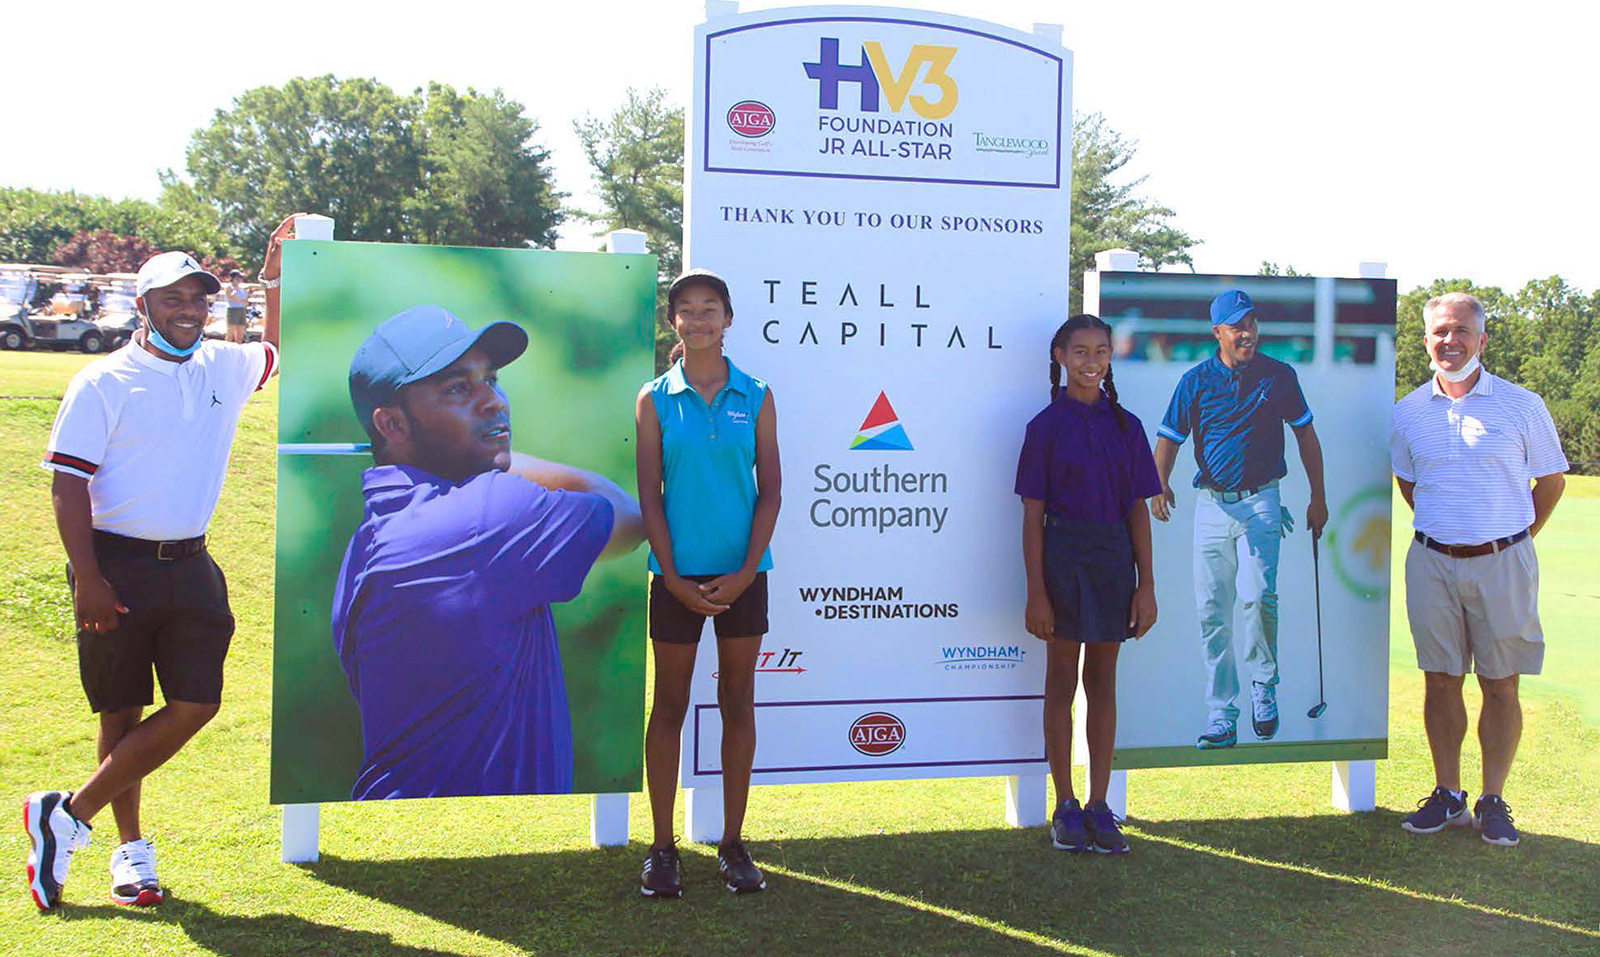 Varner’s HV3 Foundation has contributed to Youth on Course Carolinas and sponsored American Junior Golf Association Junior All-Star event